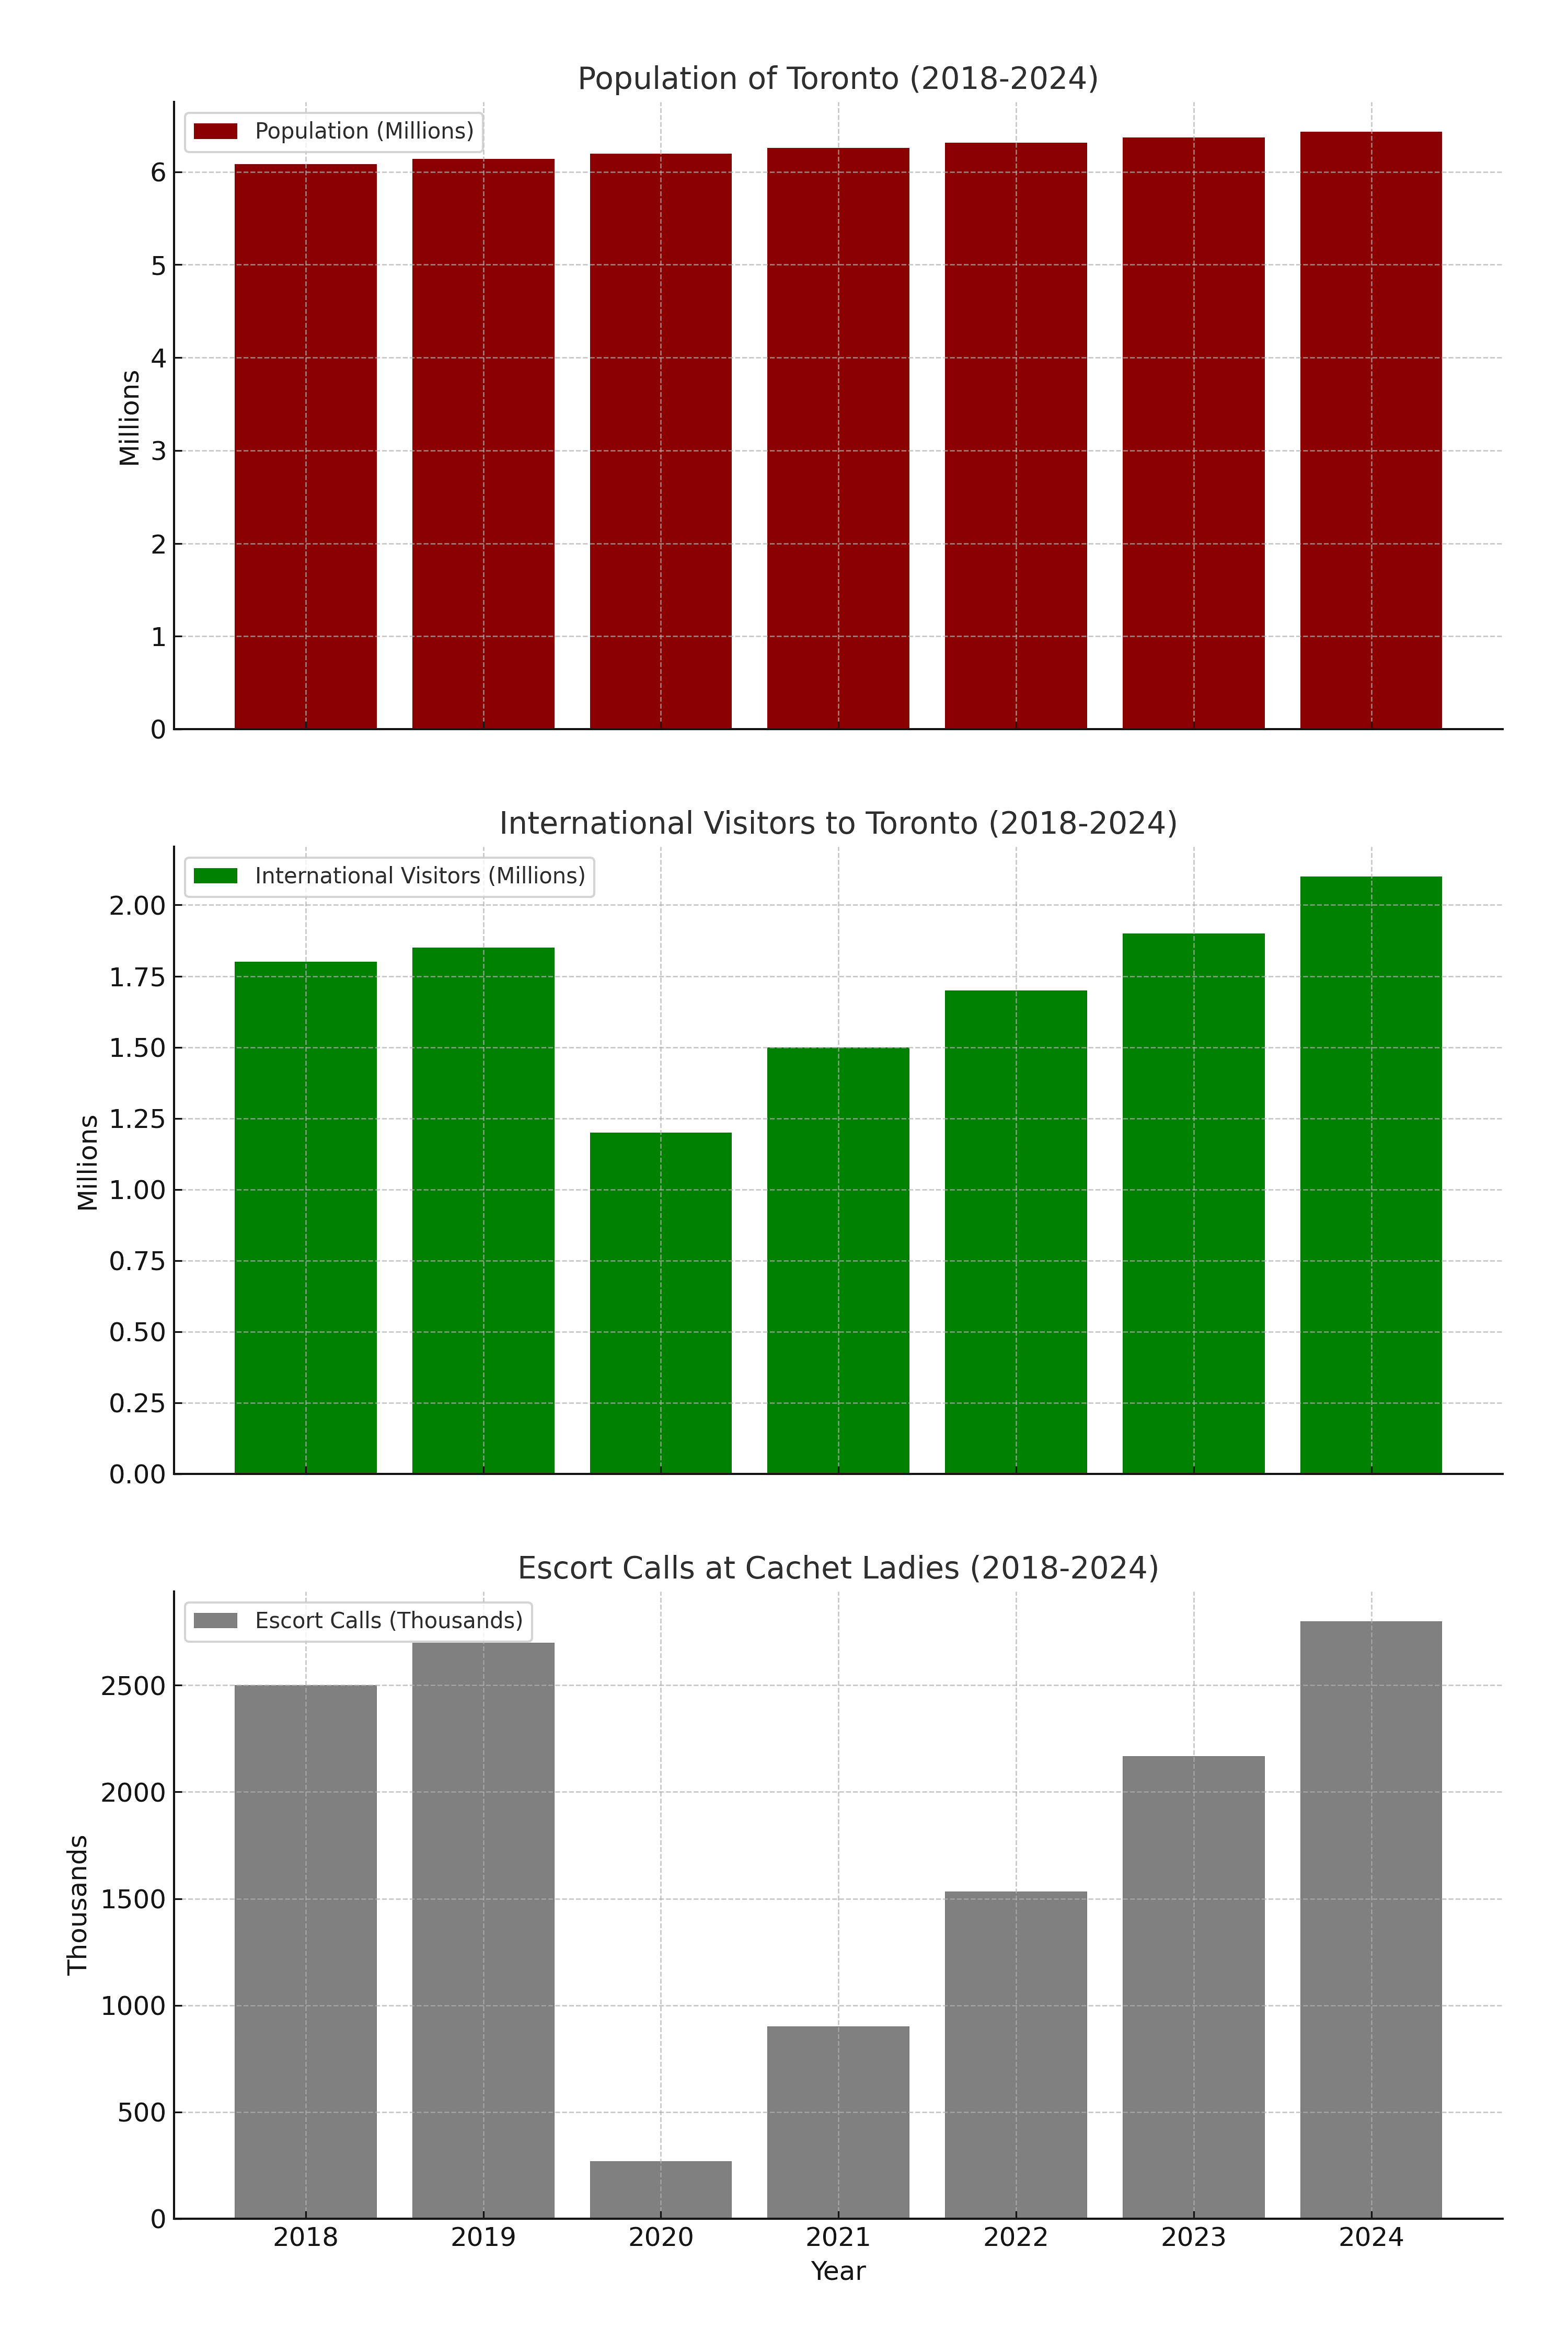 Three separate bar charts showing trends from 2018 to 2024 in Toronto's population, international visitors, and escort calls at Cachet Ladies